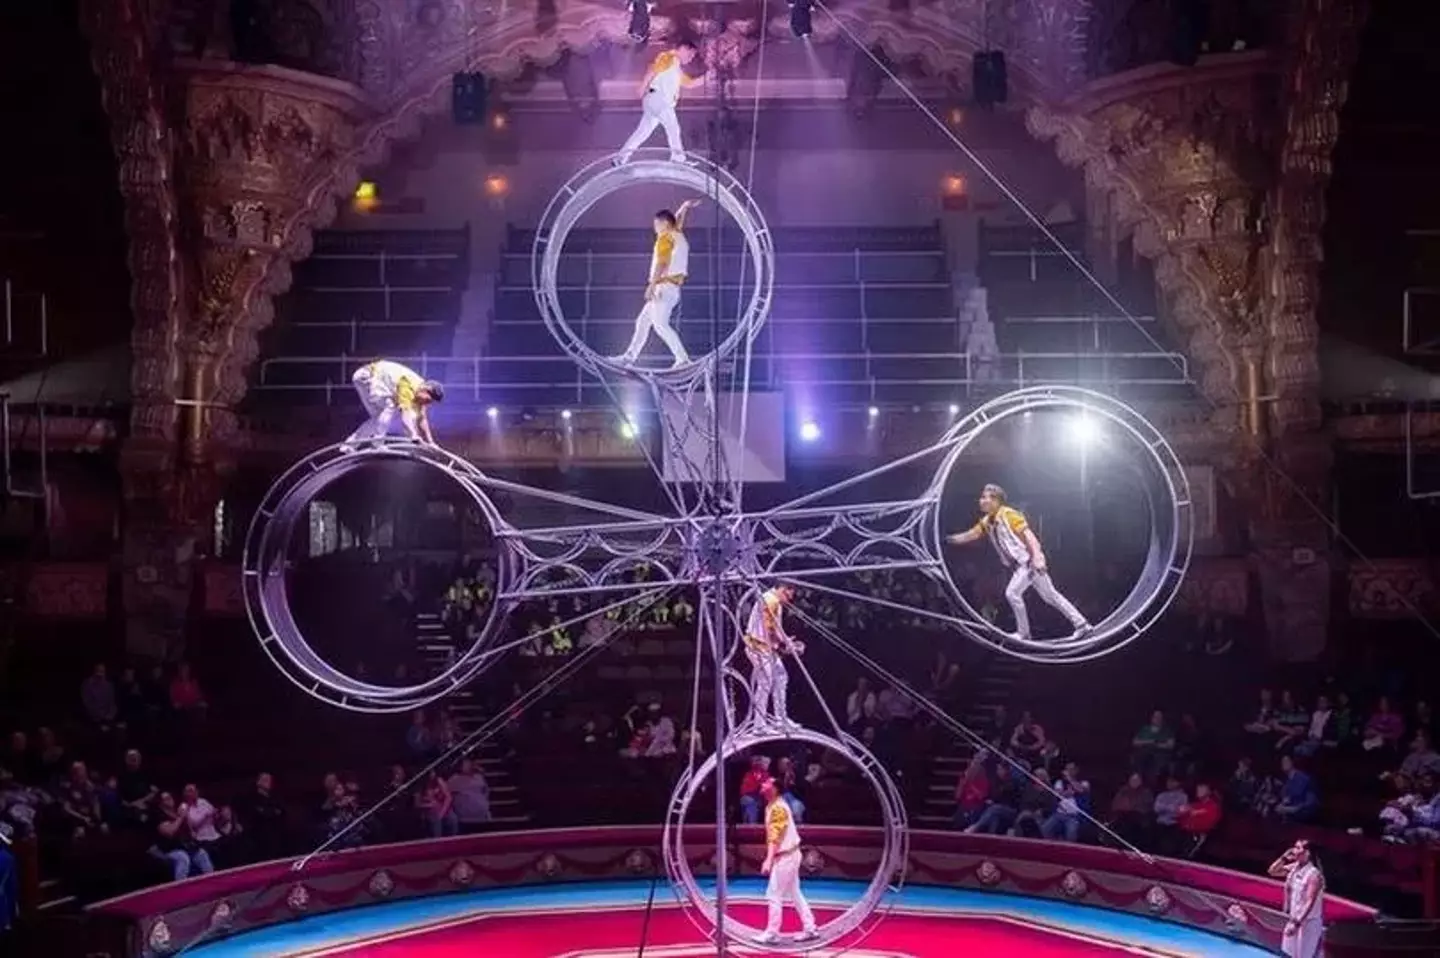 The Wheel of Faith. (Blackpool Shows and Attraction)